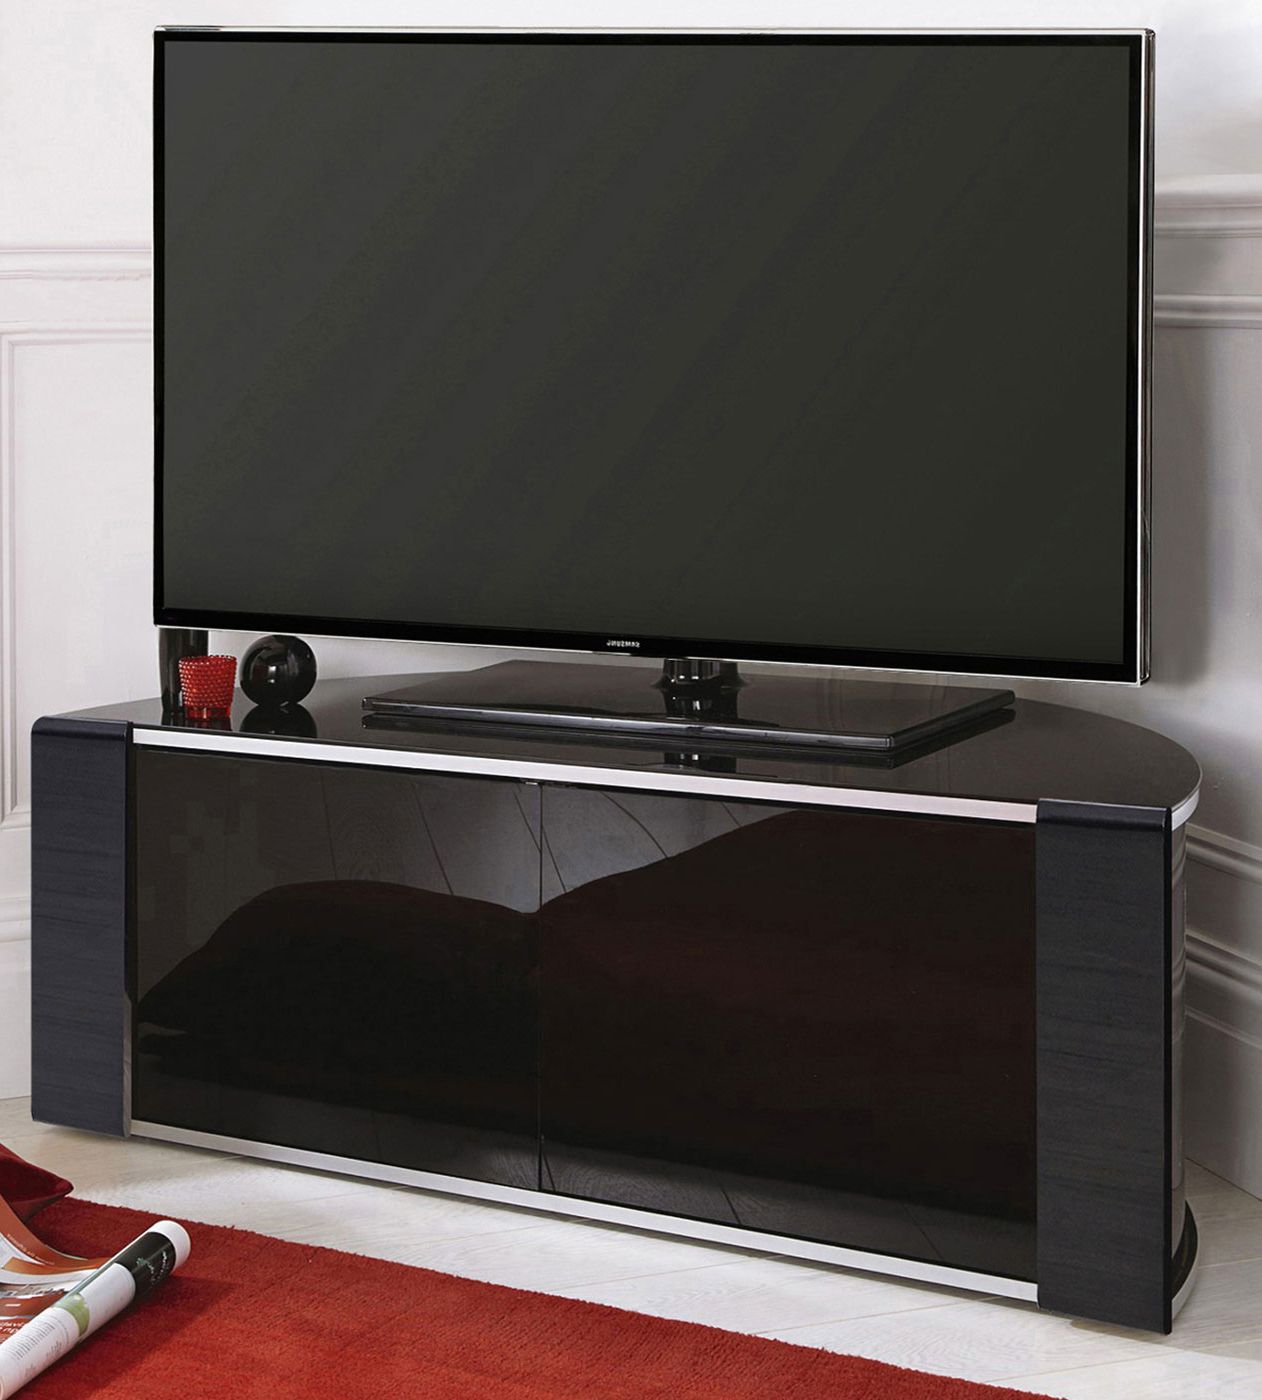 Preferred Mda Designs Sirius 850 Black Corner Glass Tv Cabinet Stand Intended For Exhibit Corner Tv Stands (View 9 of 10)